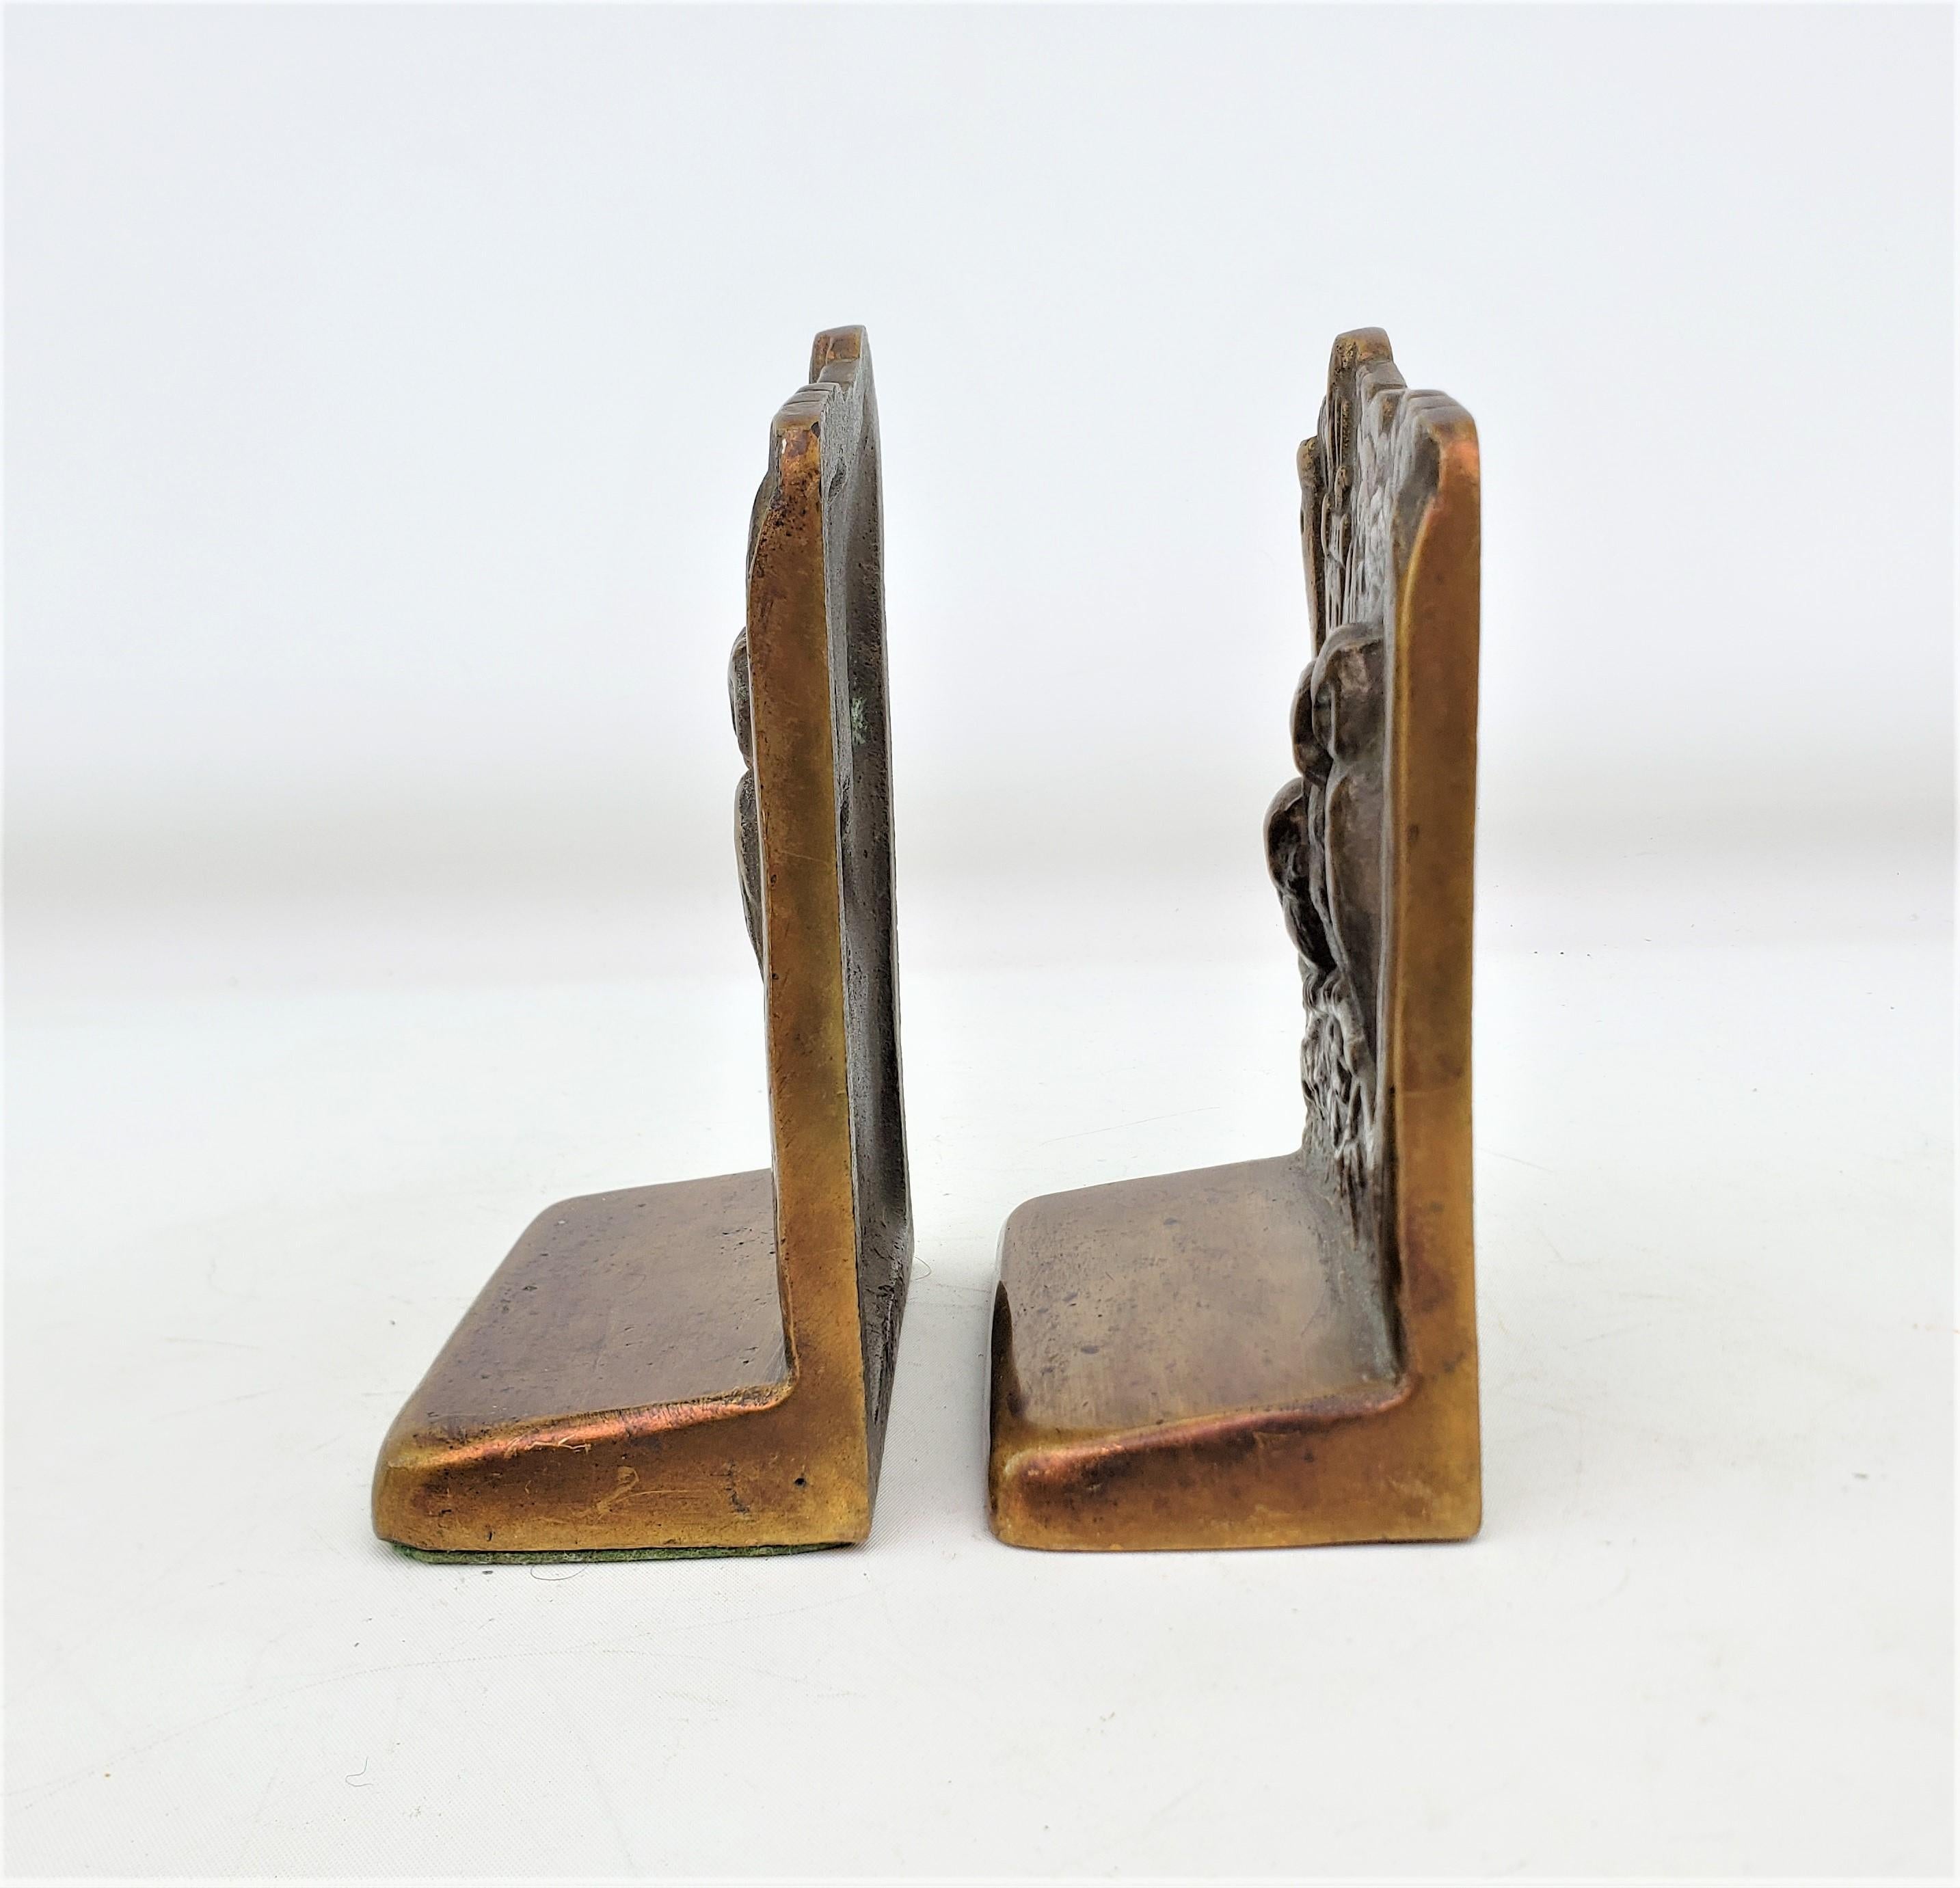 Antique Art Deco Cast & Patinated Brass Bookends Depicting Three Perched Owls For Sale 3